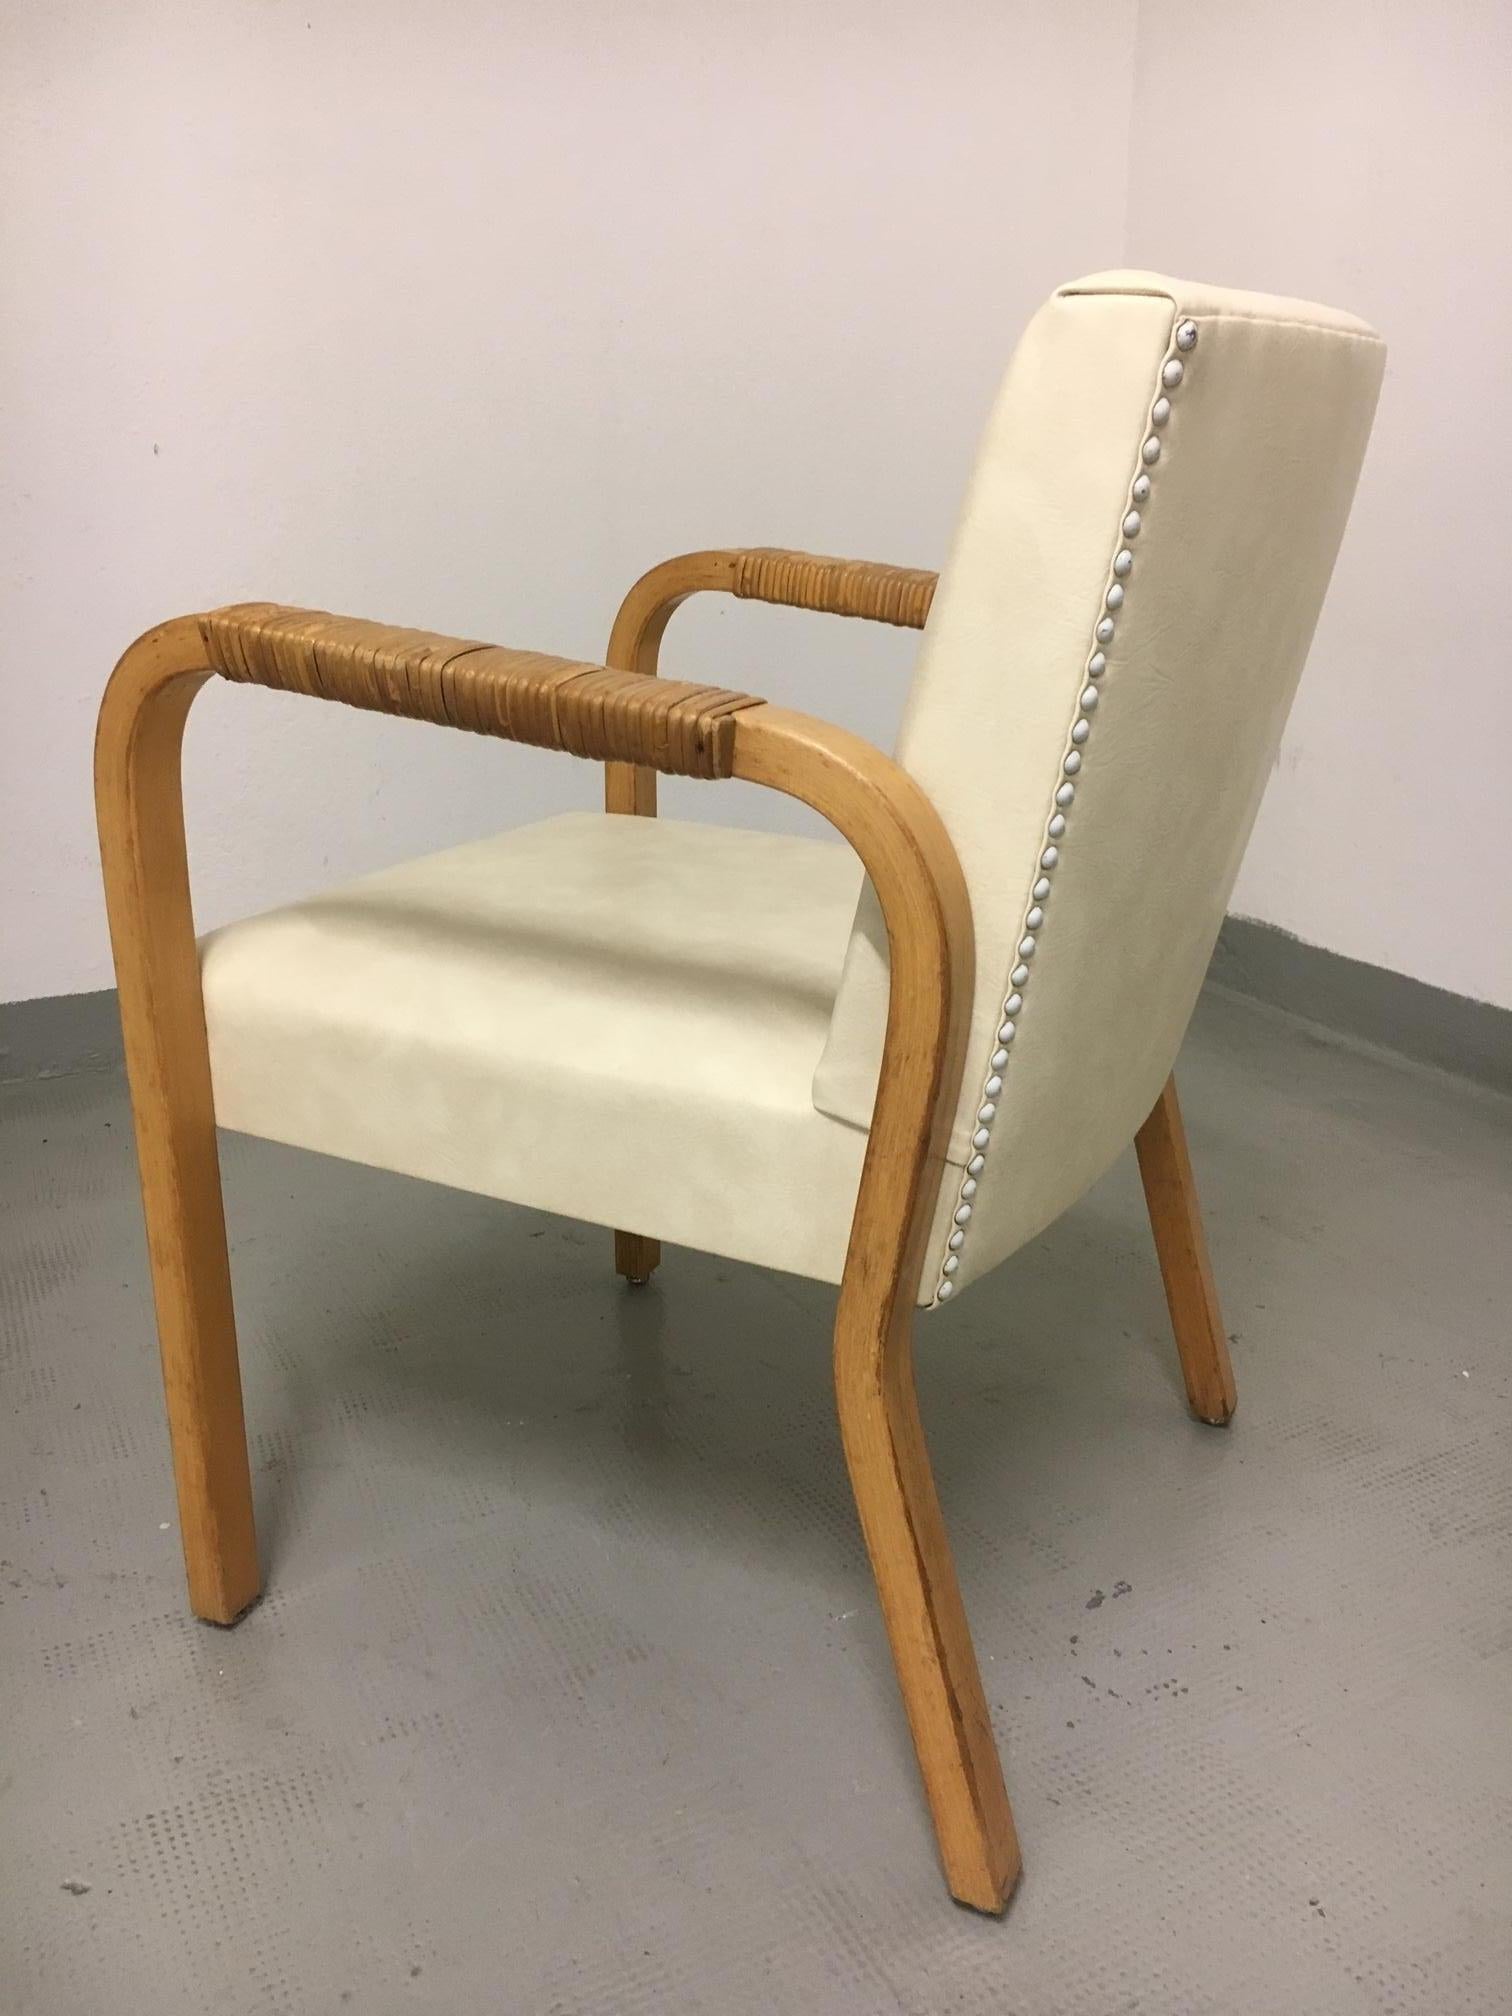 Alvar Aalto chair model 45, beech and vinyl upholstery, rattan on arms
Good vintage condition.